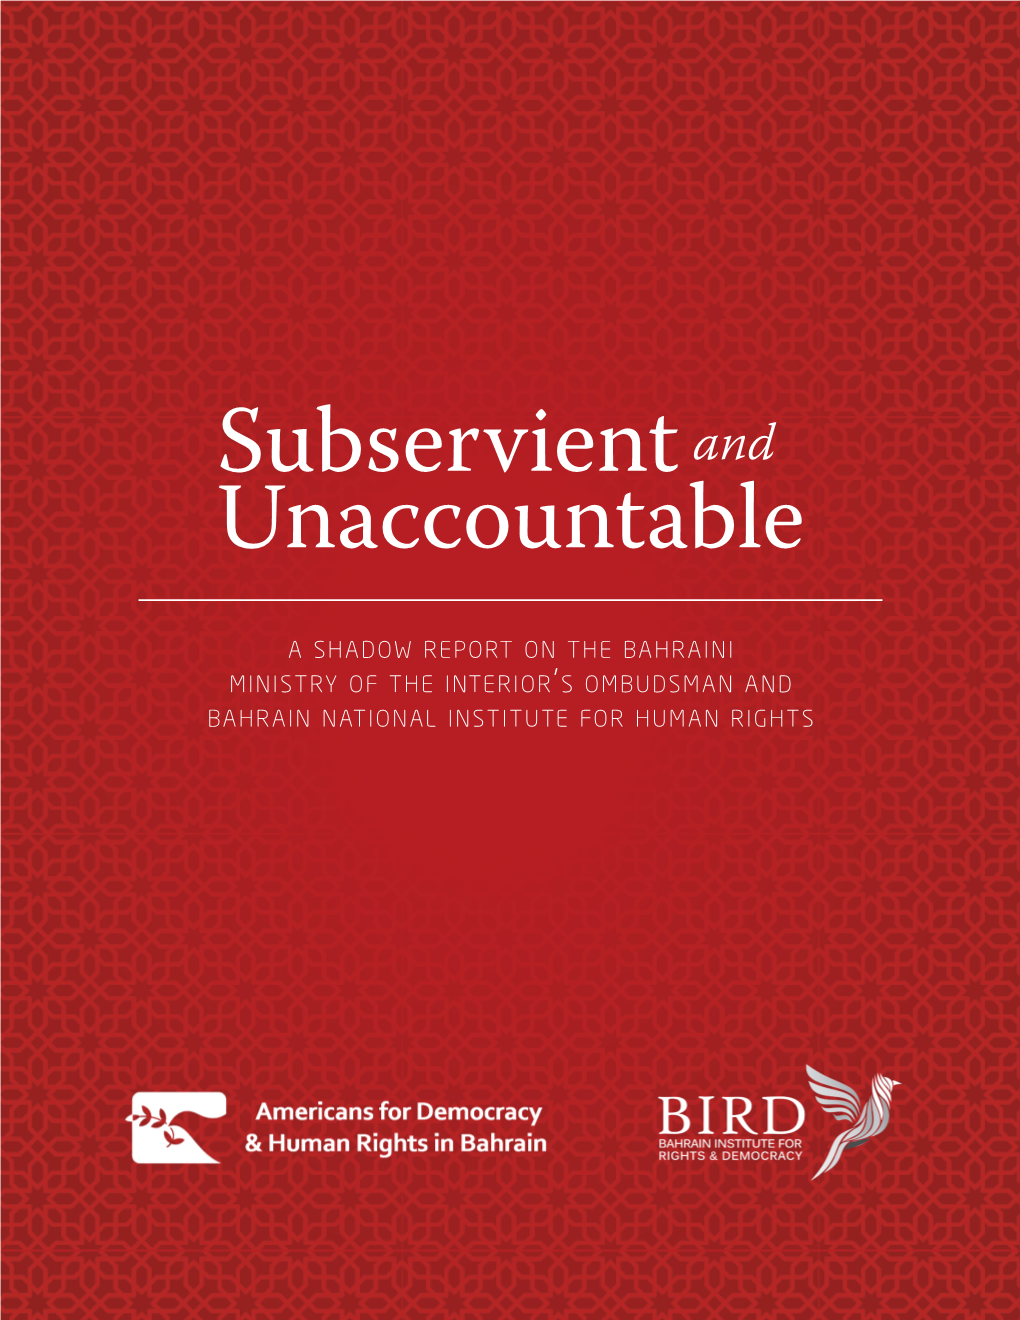 Subservient and Unaccountable: a Shadow Report on the Bahraini